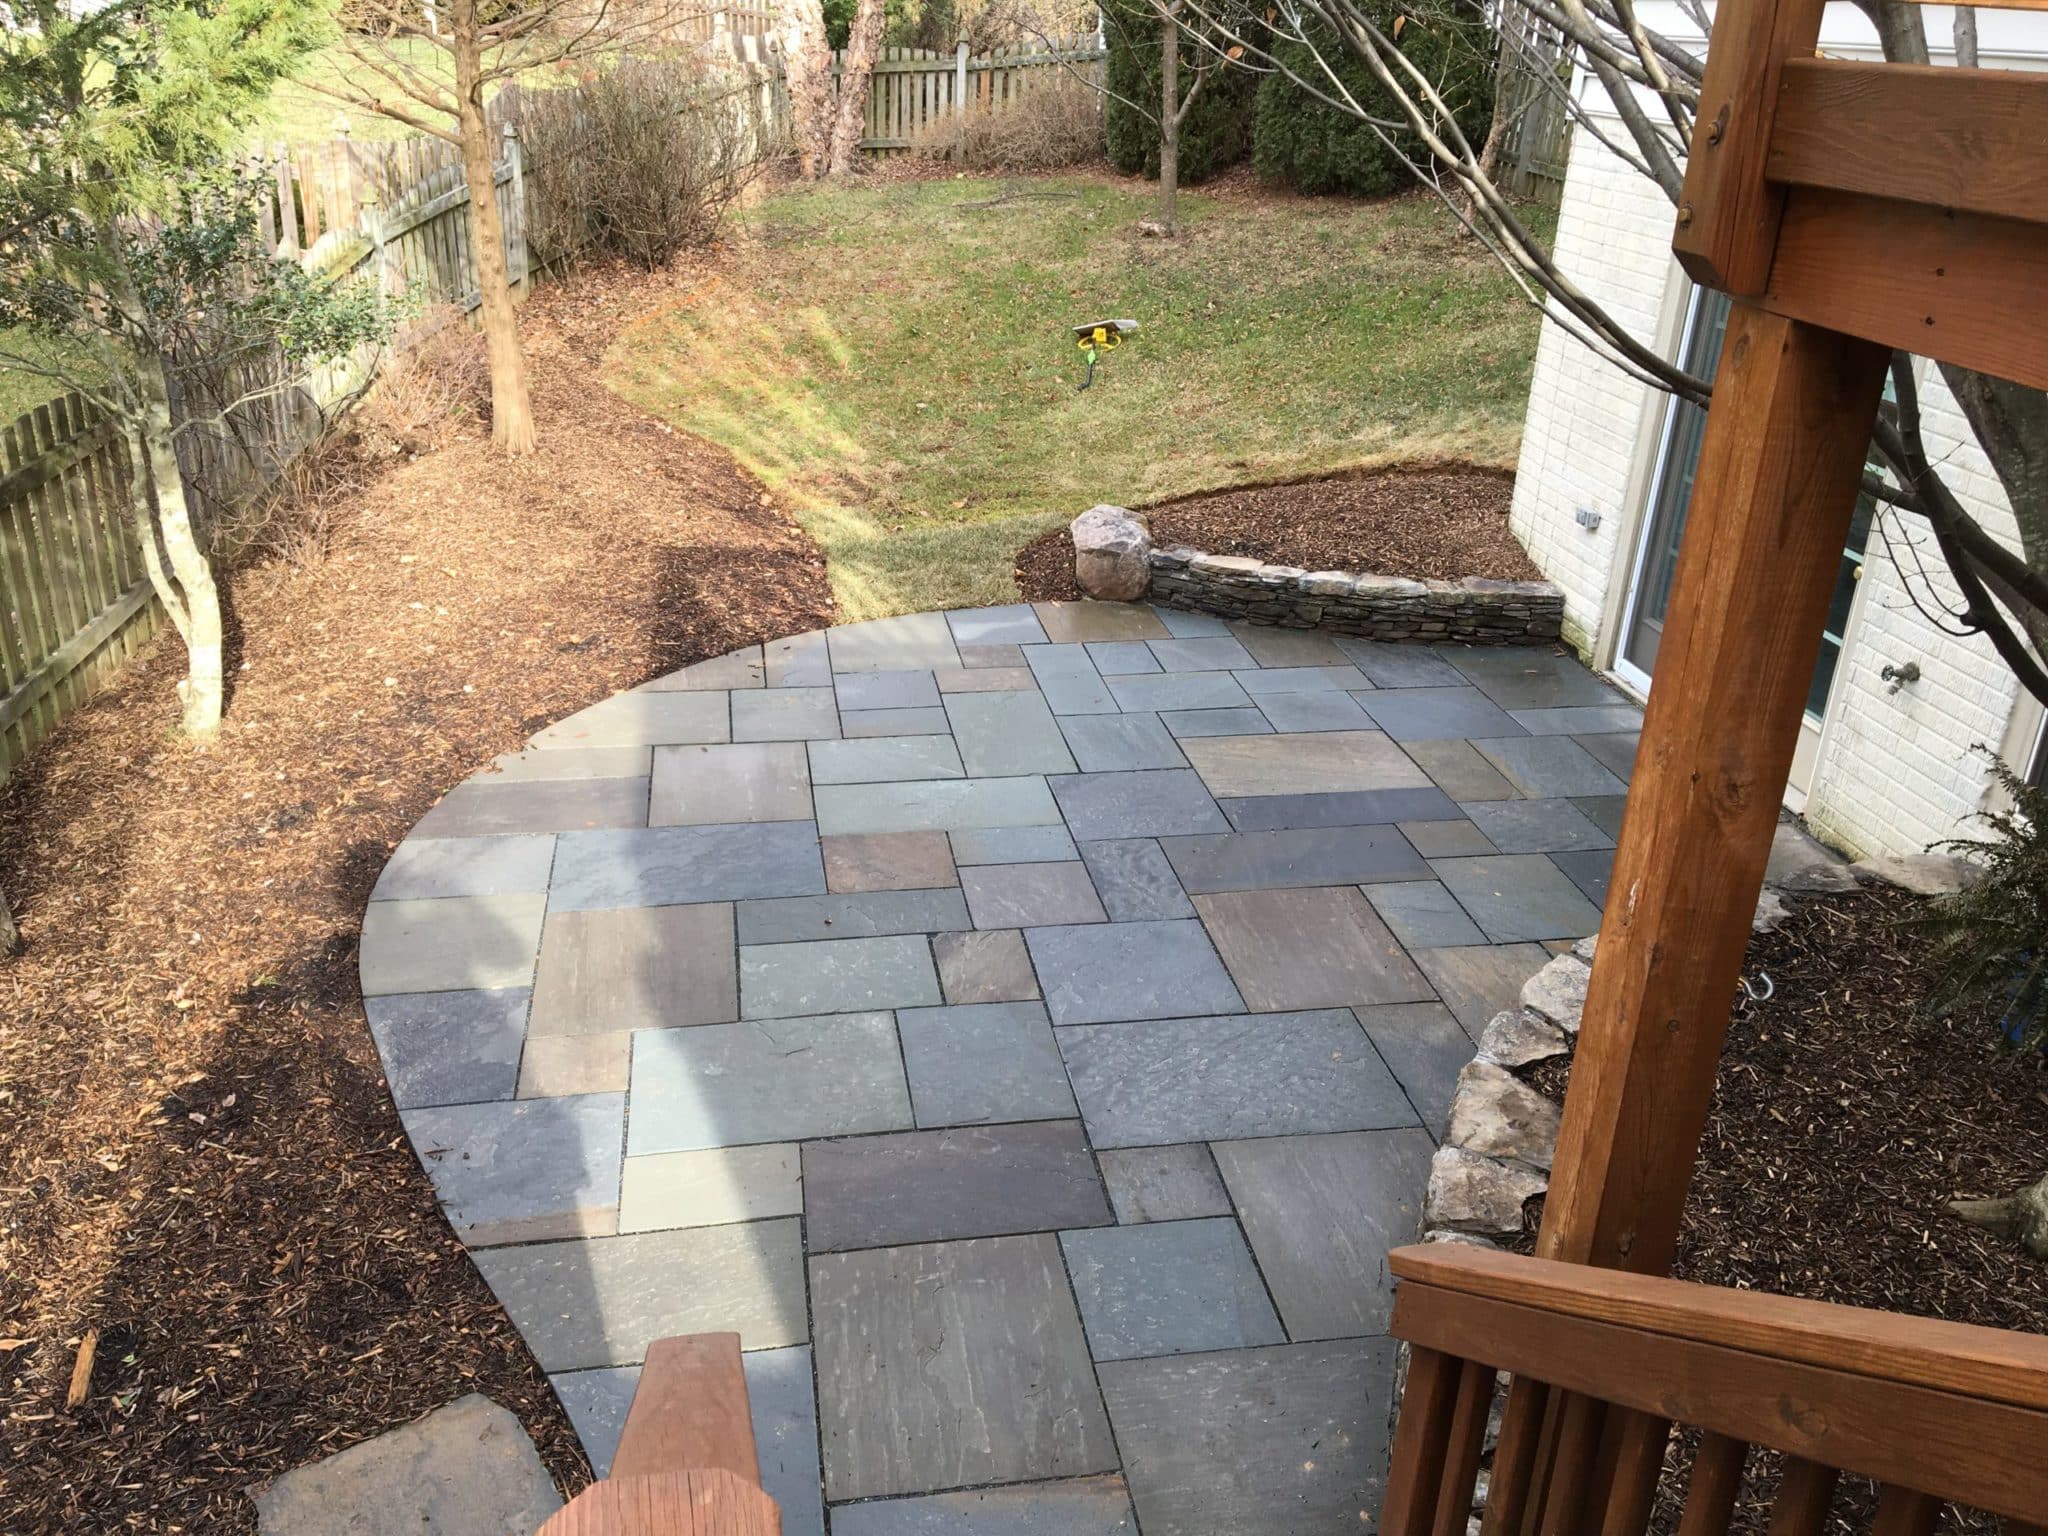 531 View from Deck of Lower-Level Flagstone Patio and Stone Garden Walls